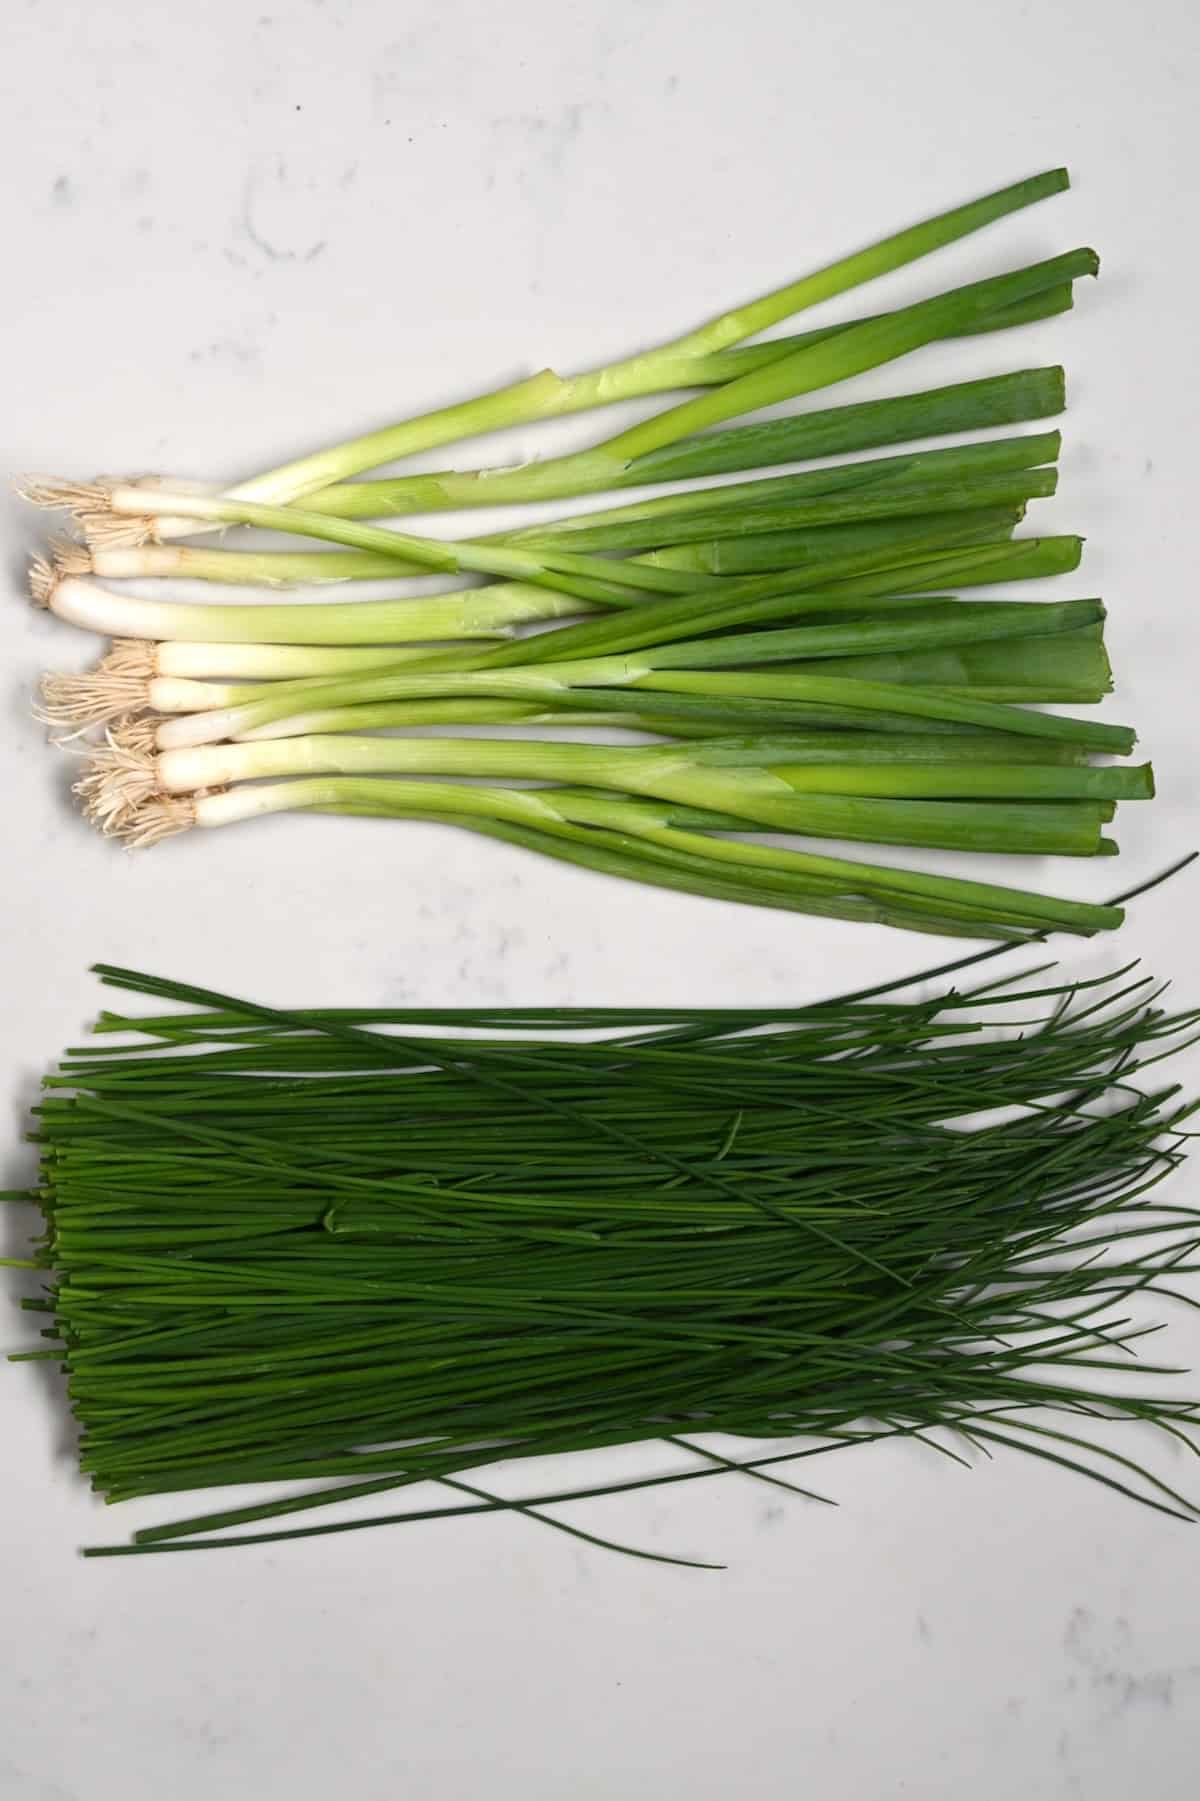 Shallots Vs Spring Onion: Are They The Same Thing?